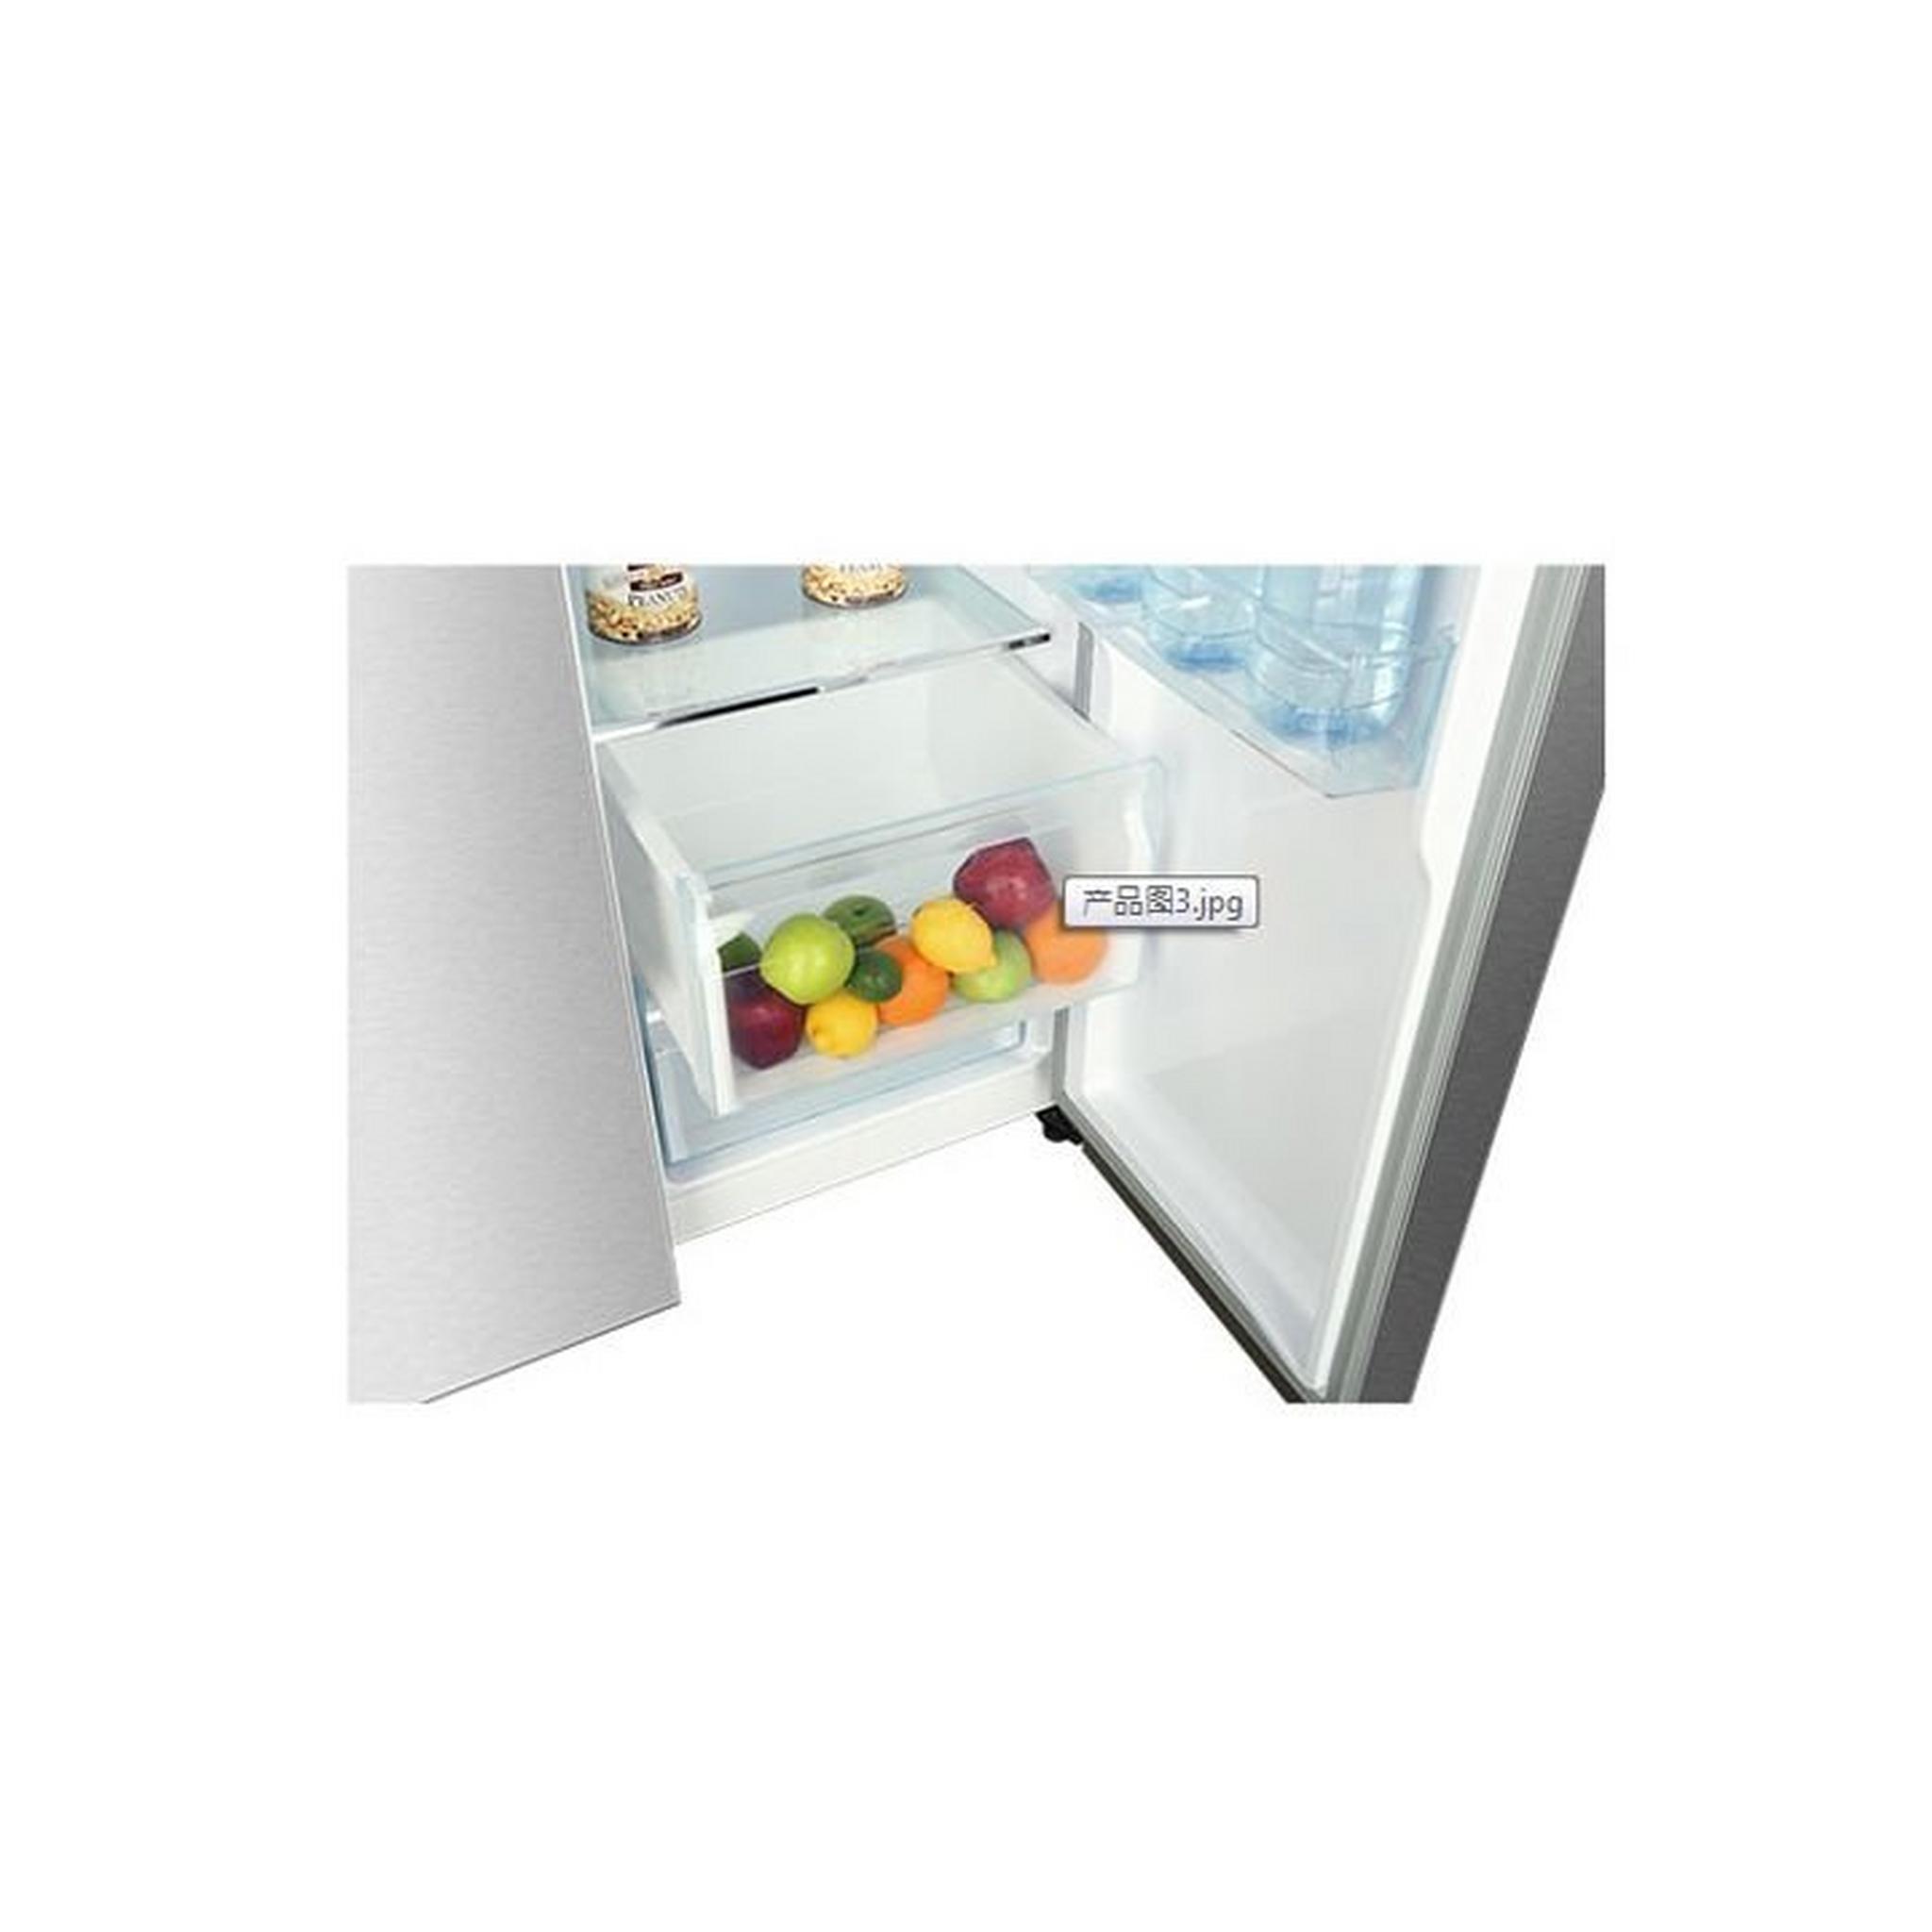 Haier 17.9CFT Side by Side Refrigerator (HRF-618DW6-3) - White